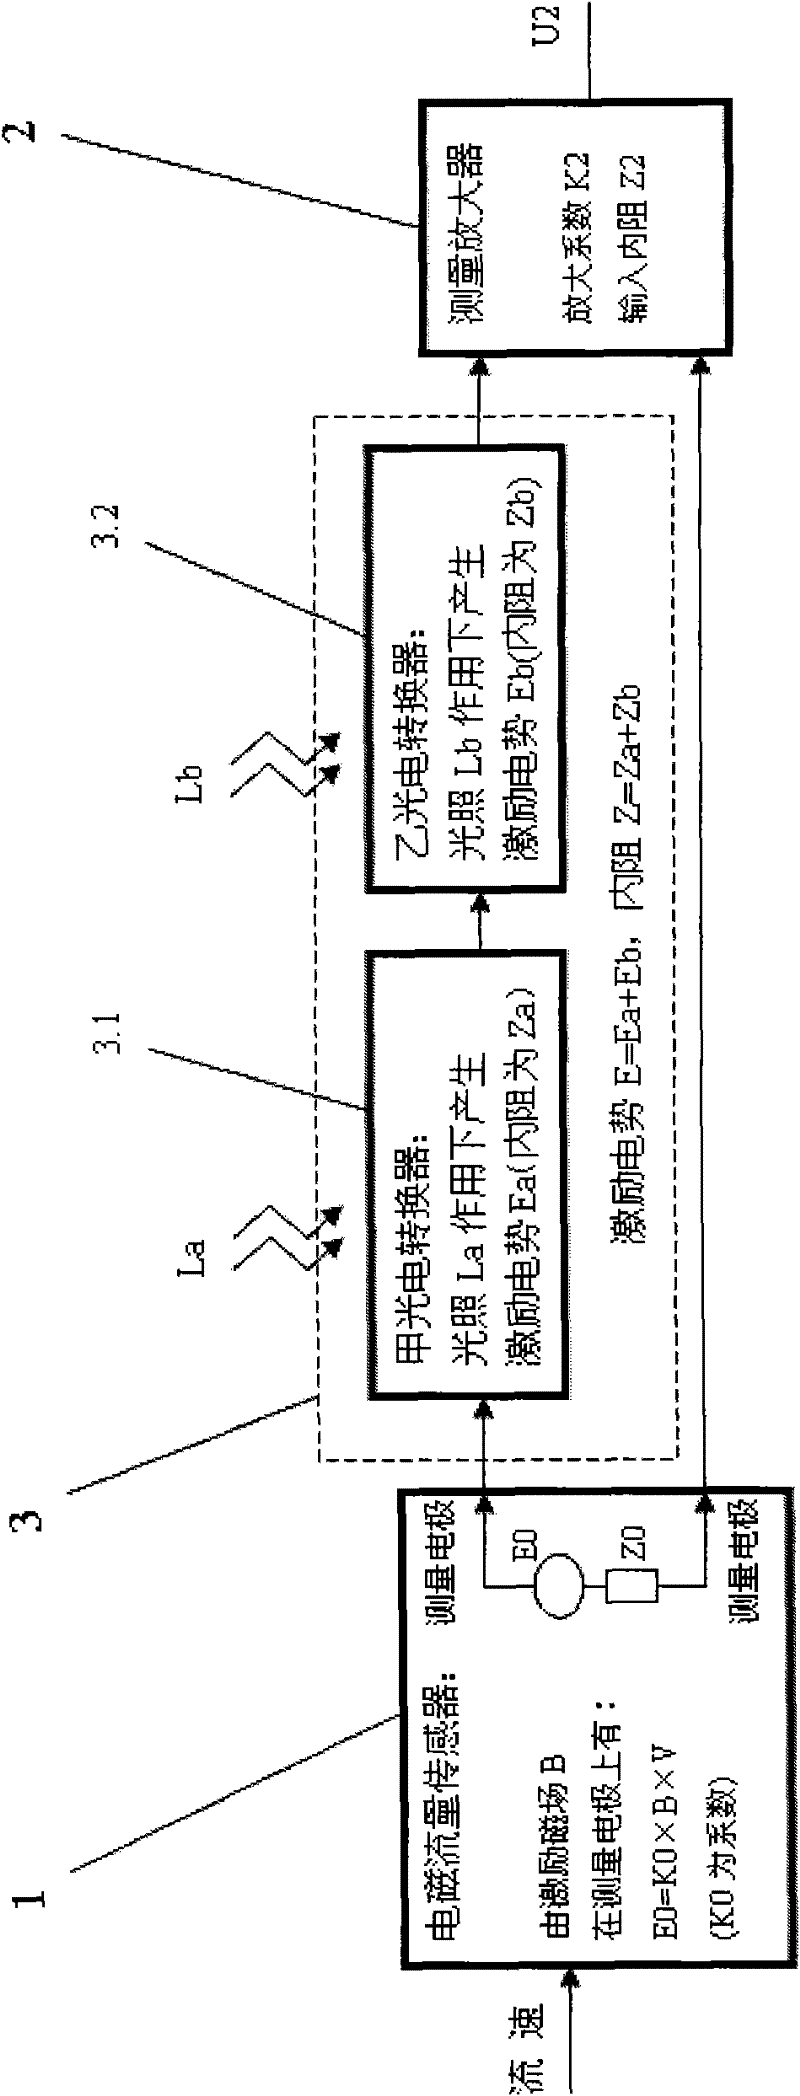 Double-excitation electromagnetic flow meter based on photoelectrical coupling